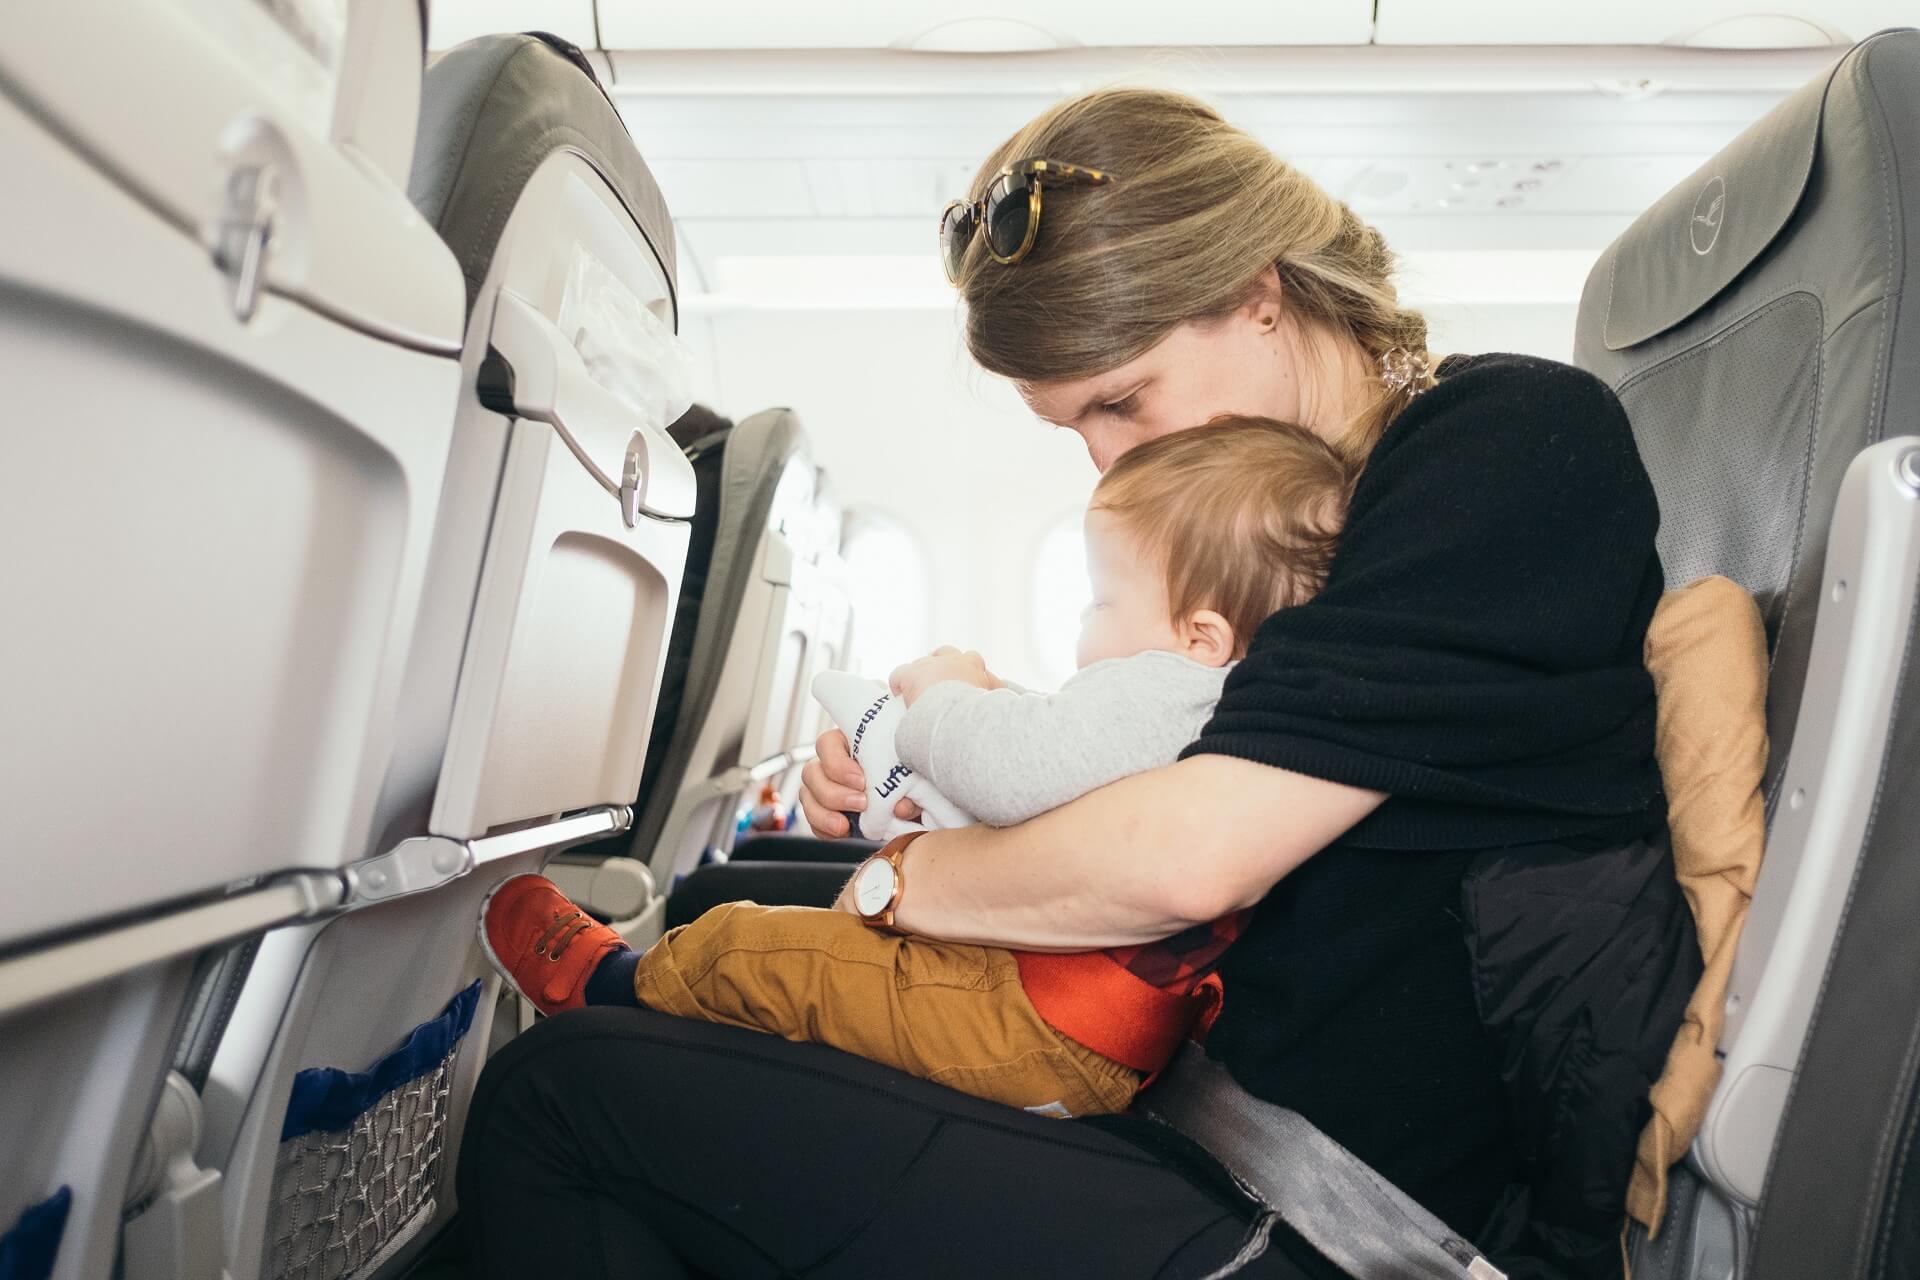 Mother on a plane with baby on her lap